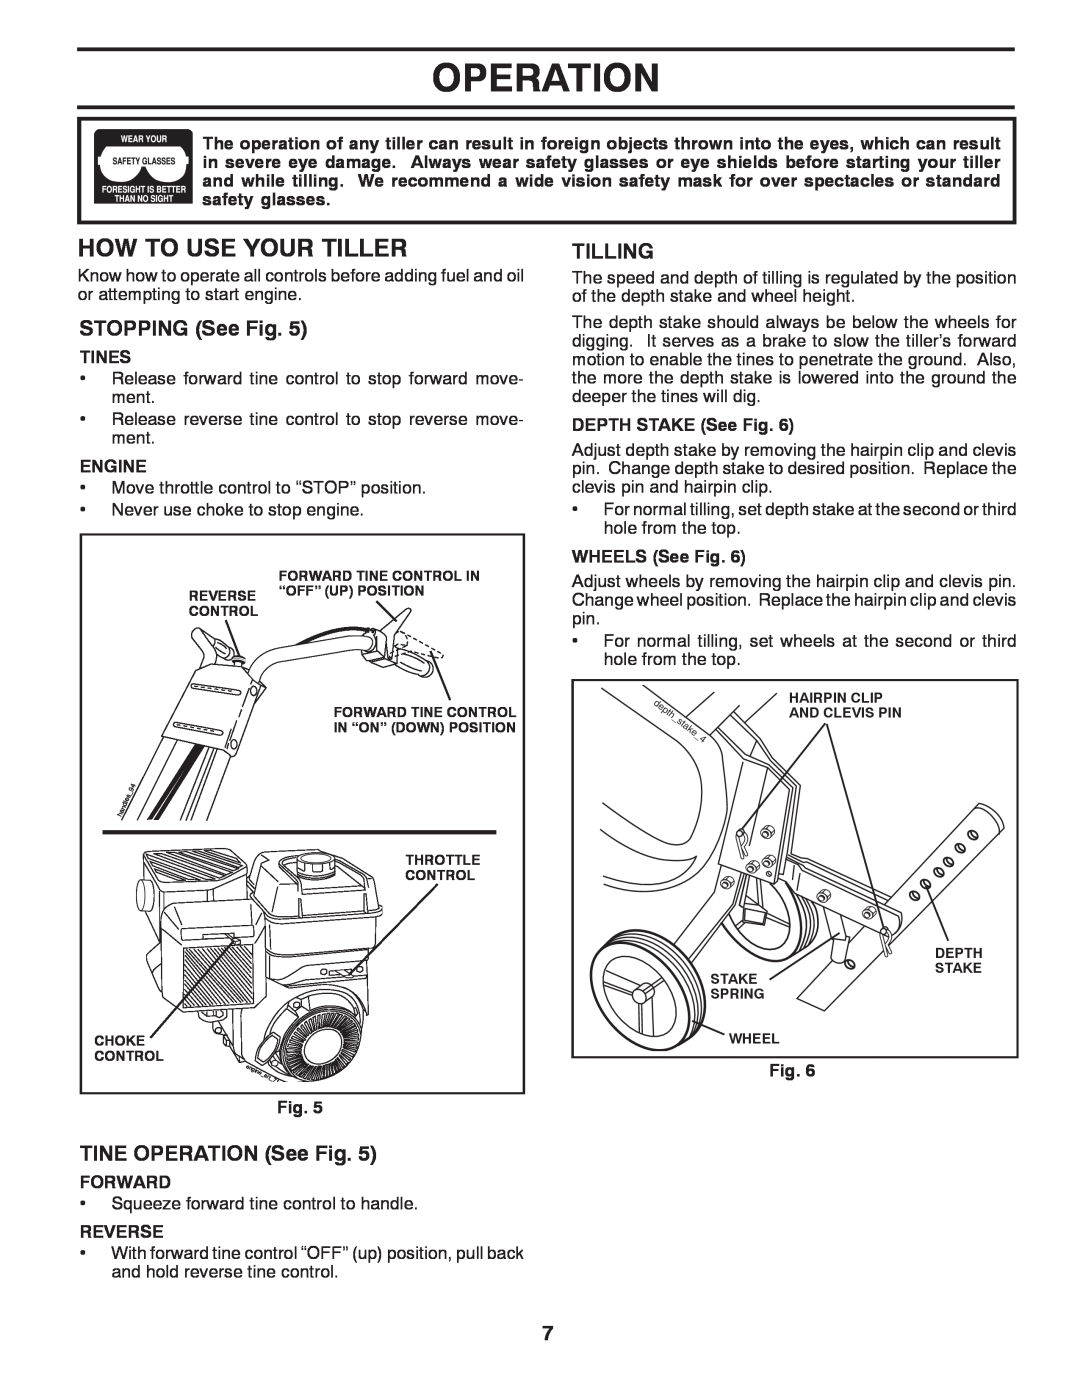 McCulloch 532 43 36-95 How To Use Your Tiller, STOPPING See Fig, TINE OPERATION See Fig, Tilling, Tines, Engine, Forward 